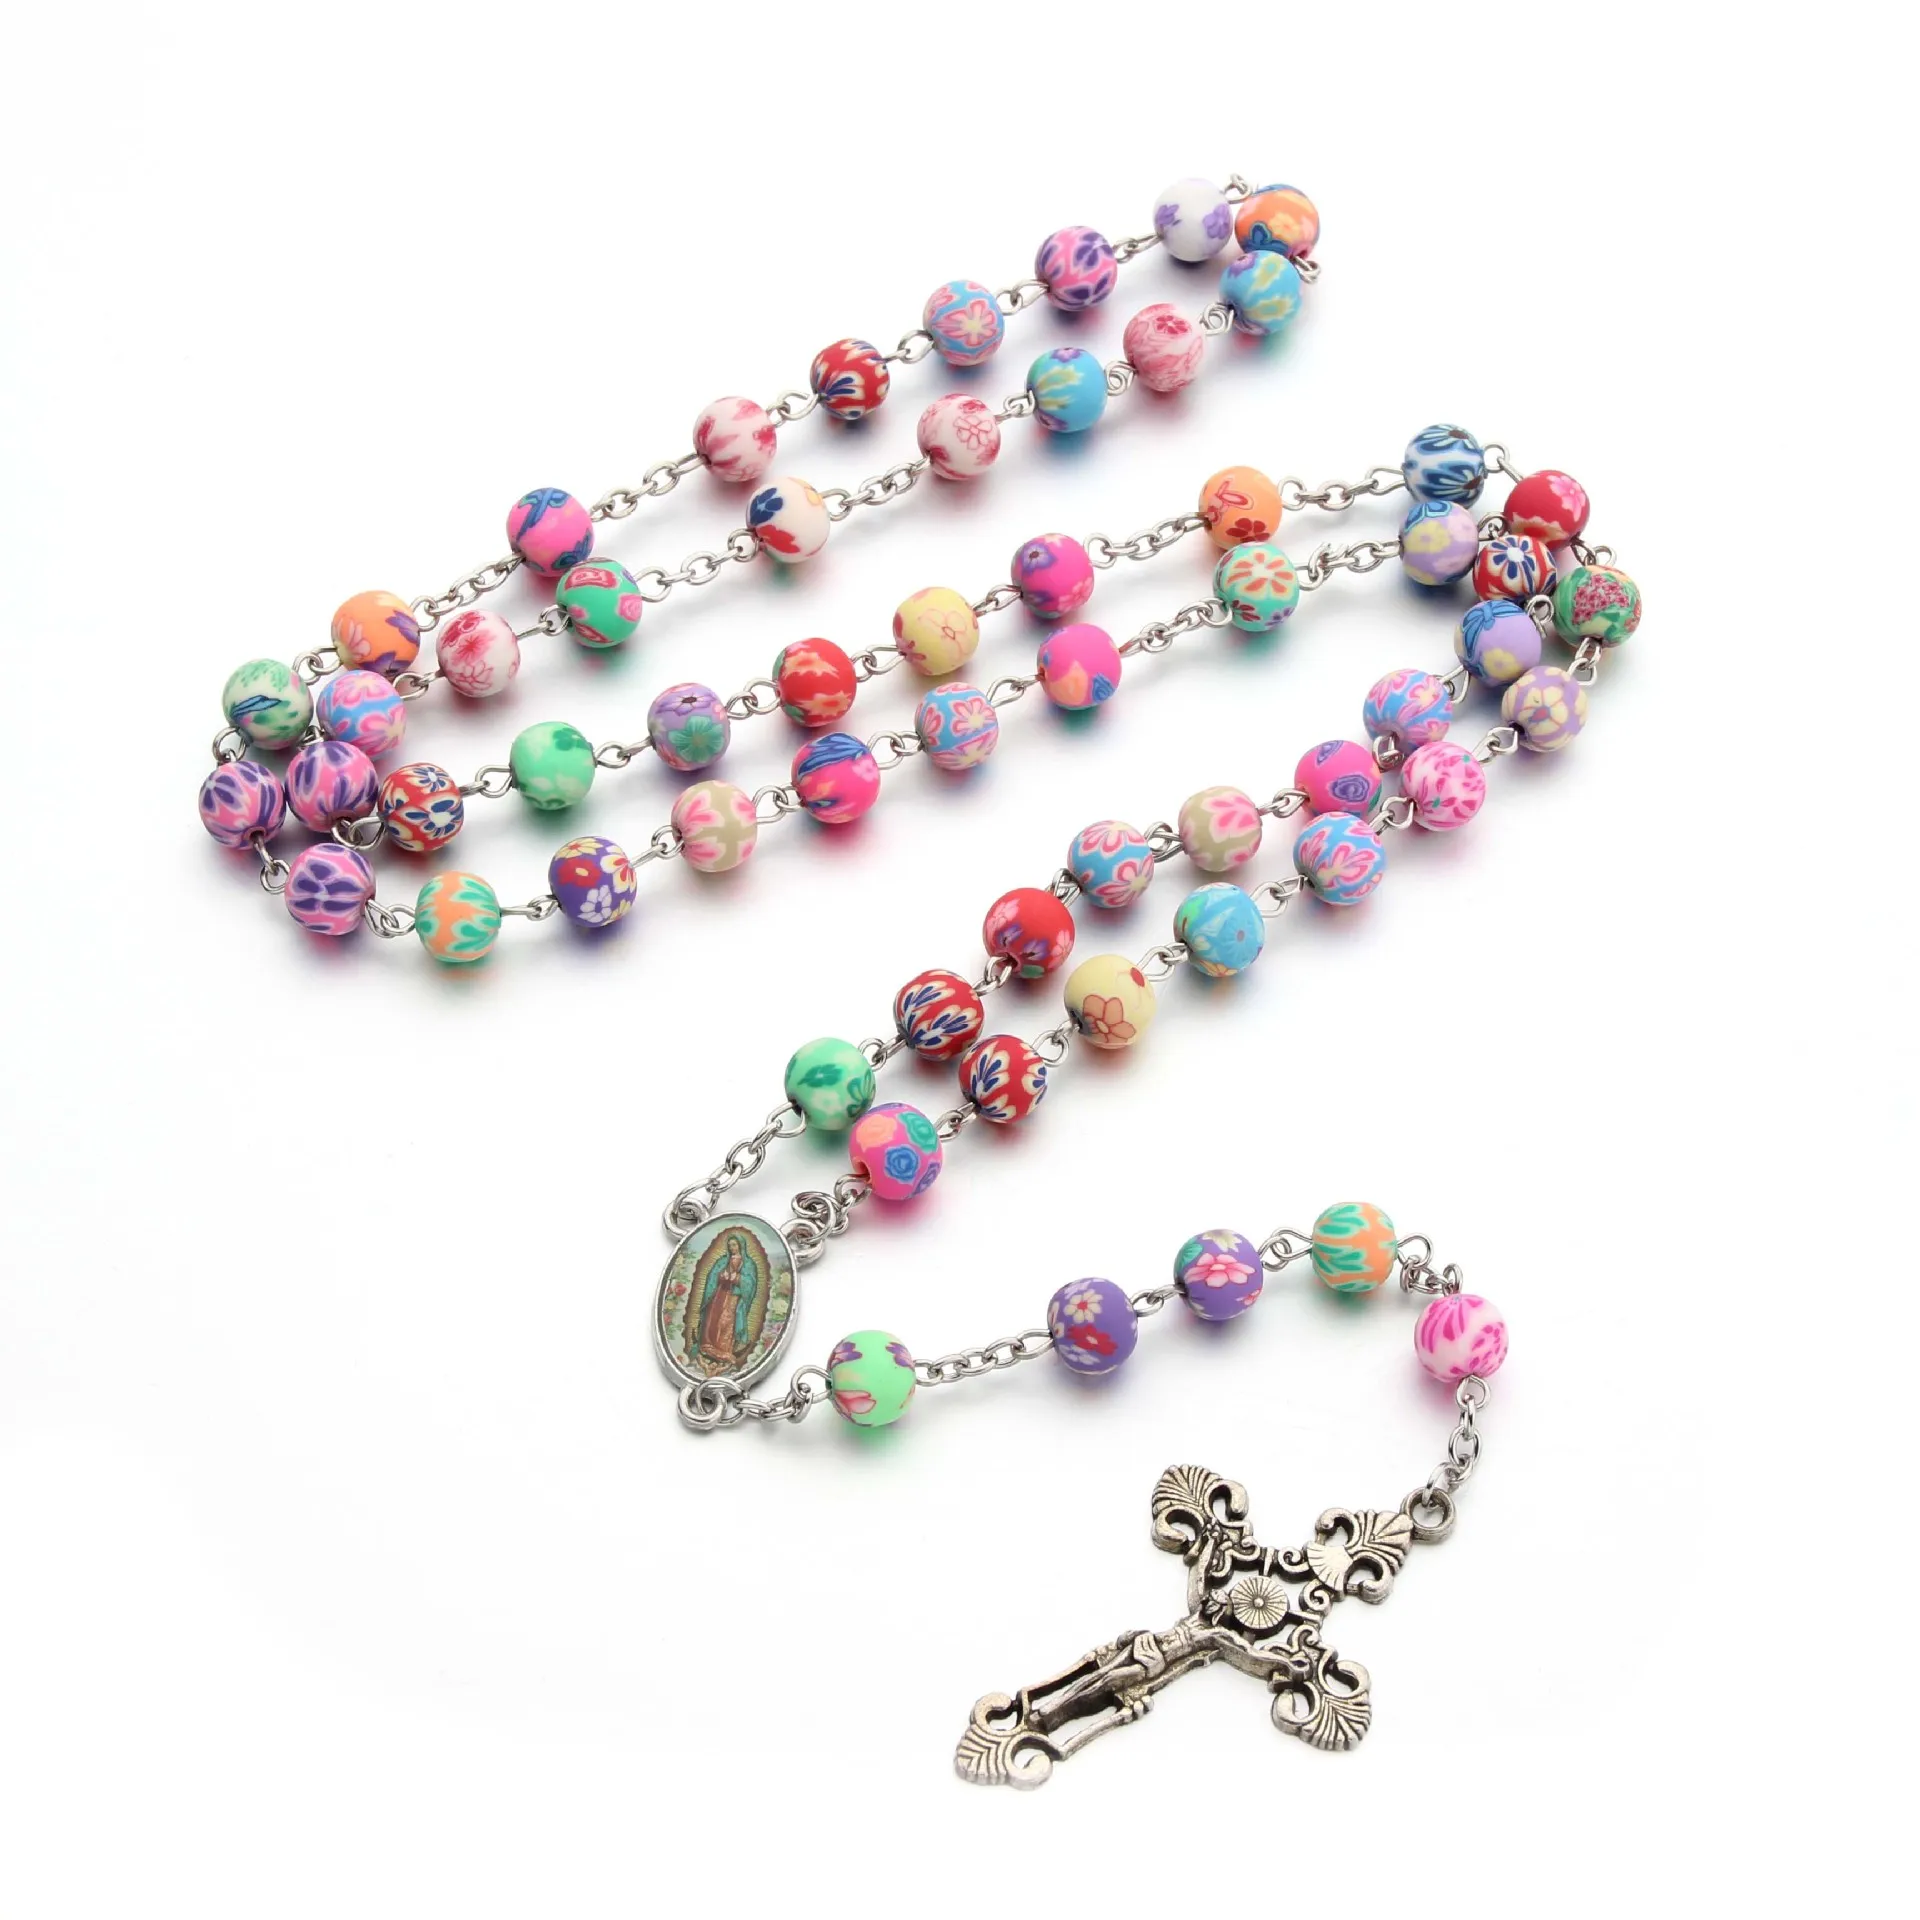 

Amazon Best Selling Religious Catholic Christian Ceramic Rosary Bead Cross Necklace Colorful Beads Virgin Mary Cross Necklaces, As picture show